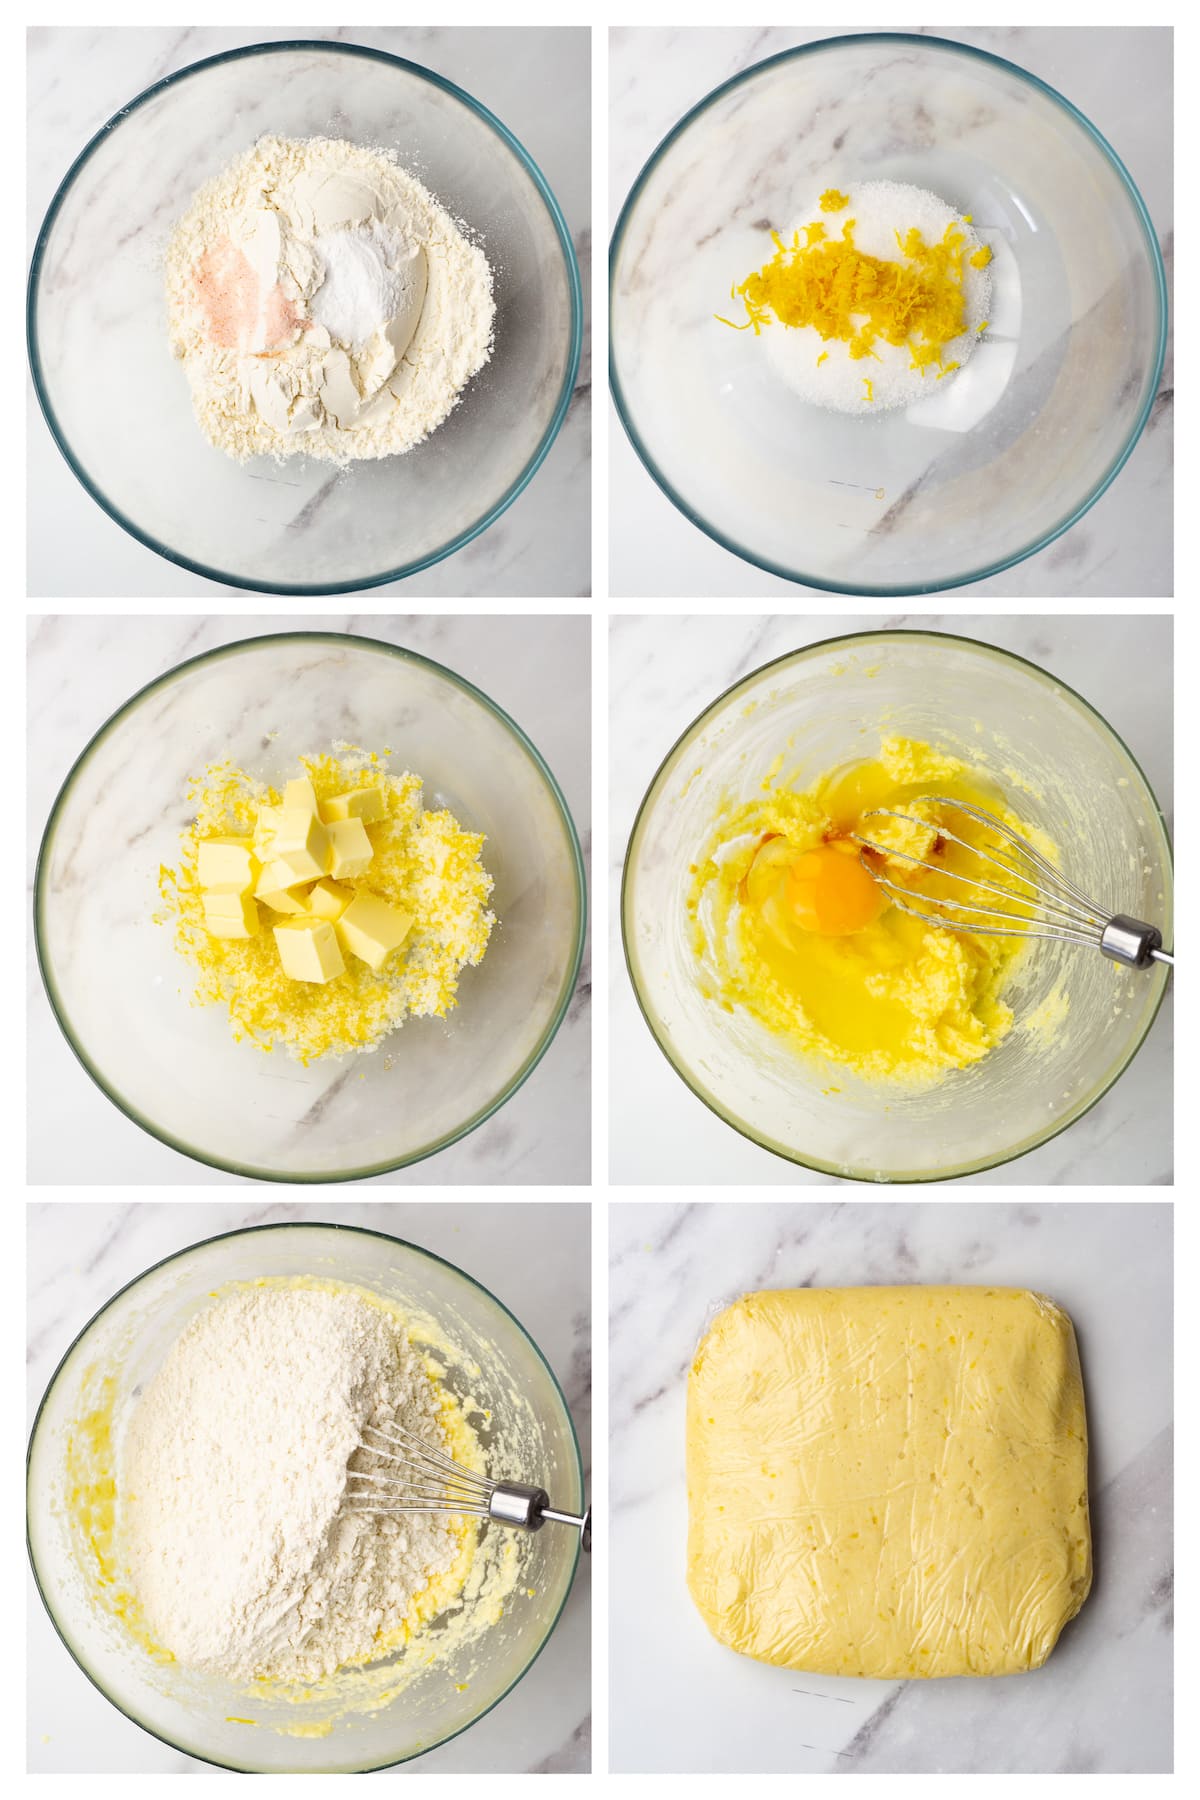 The collage image shows six steps to make the dough for lemon crinkle cookies.